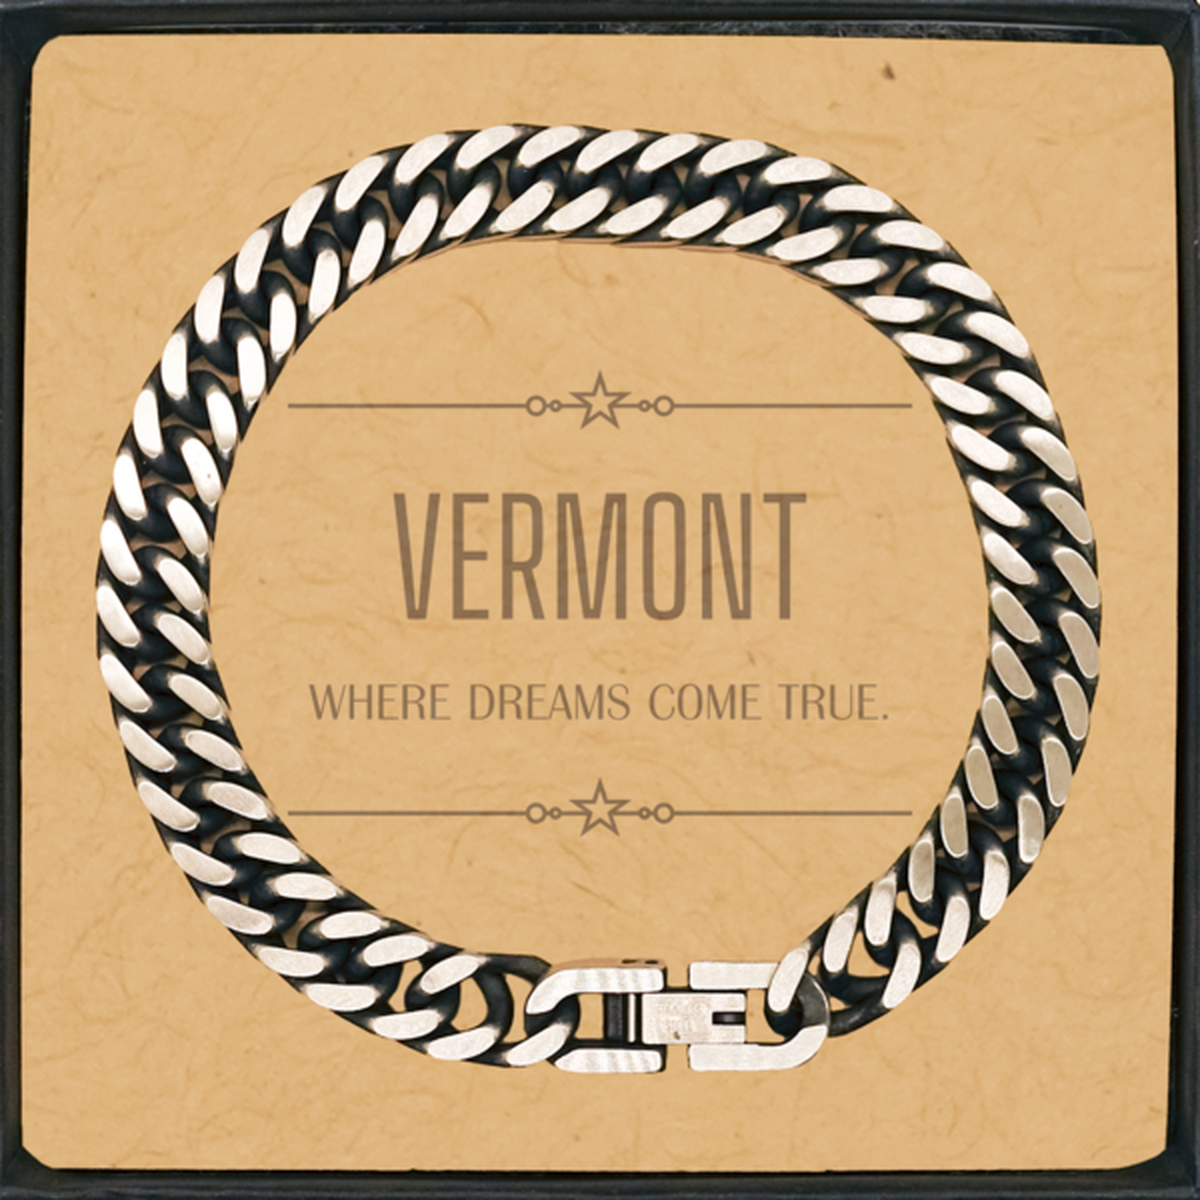 Love Vermont State Cuban Link Chain Bracelet, Vermont Where dreams come true, Birthday Inspirational Gifts For Vermont Men, Women, Friends